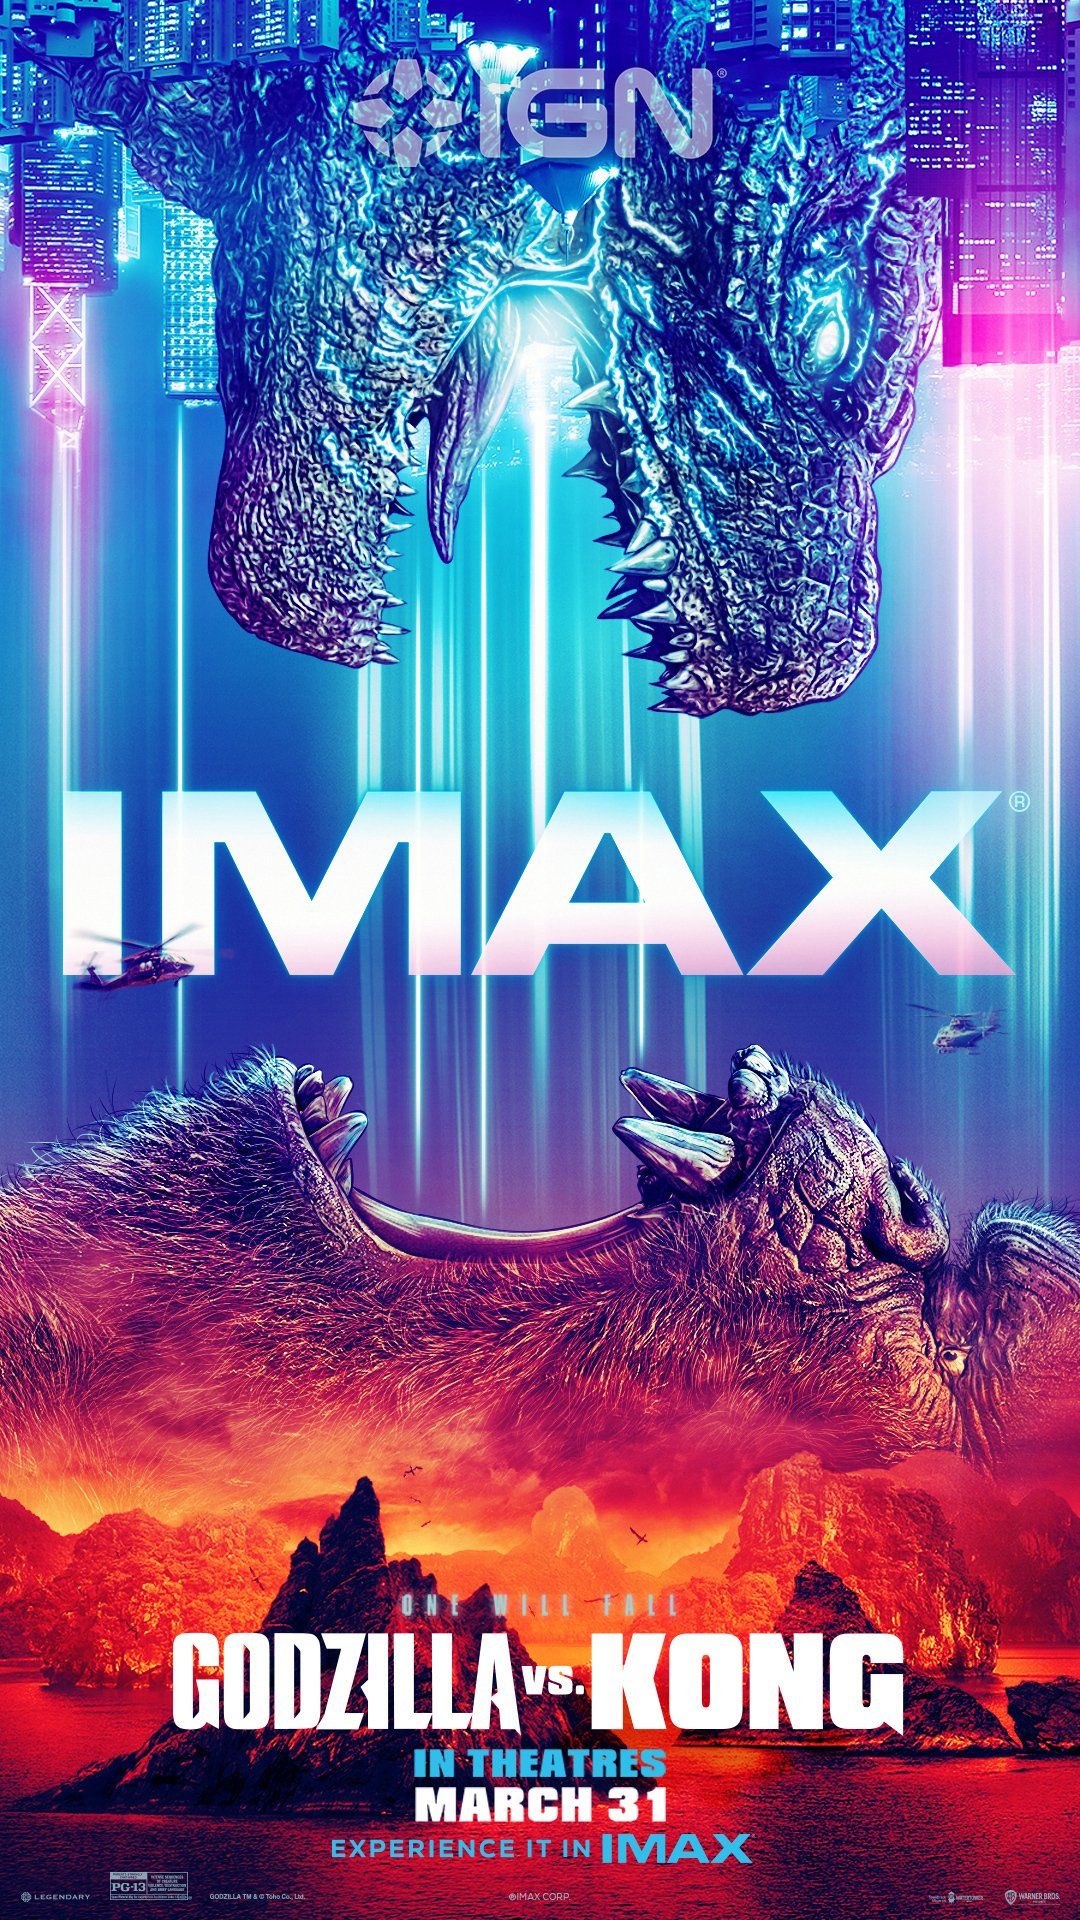 Tickets Are On Sale Today and 'Godzilla vs. Kong' Gets One More Badass IMAX Poster to Celebrate